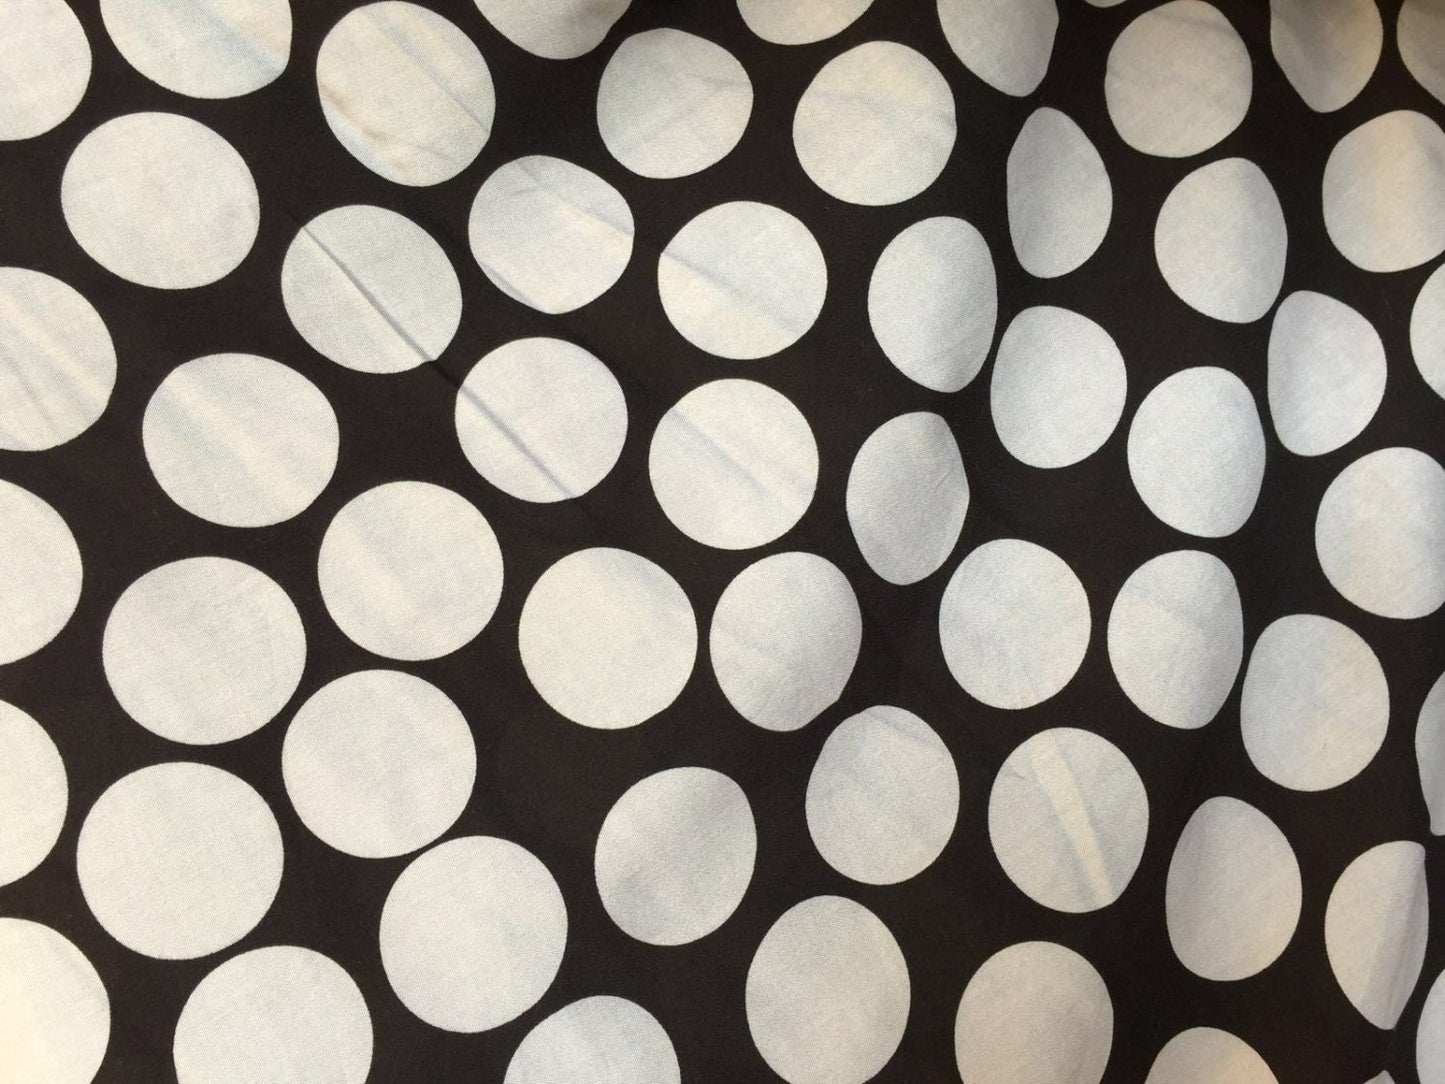 Rayon Challis Large Ligth Gray Polka Dots Black Background 58 Inches Wide Fabric Sold by the Yard Soft Flowy Organic Kids Dress Fabric